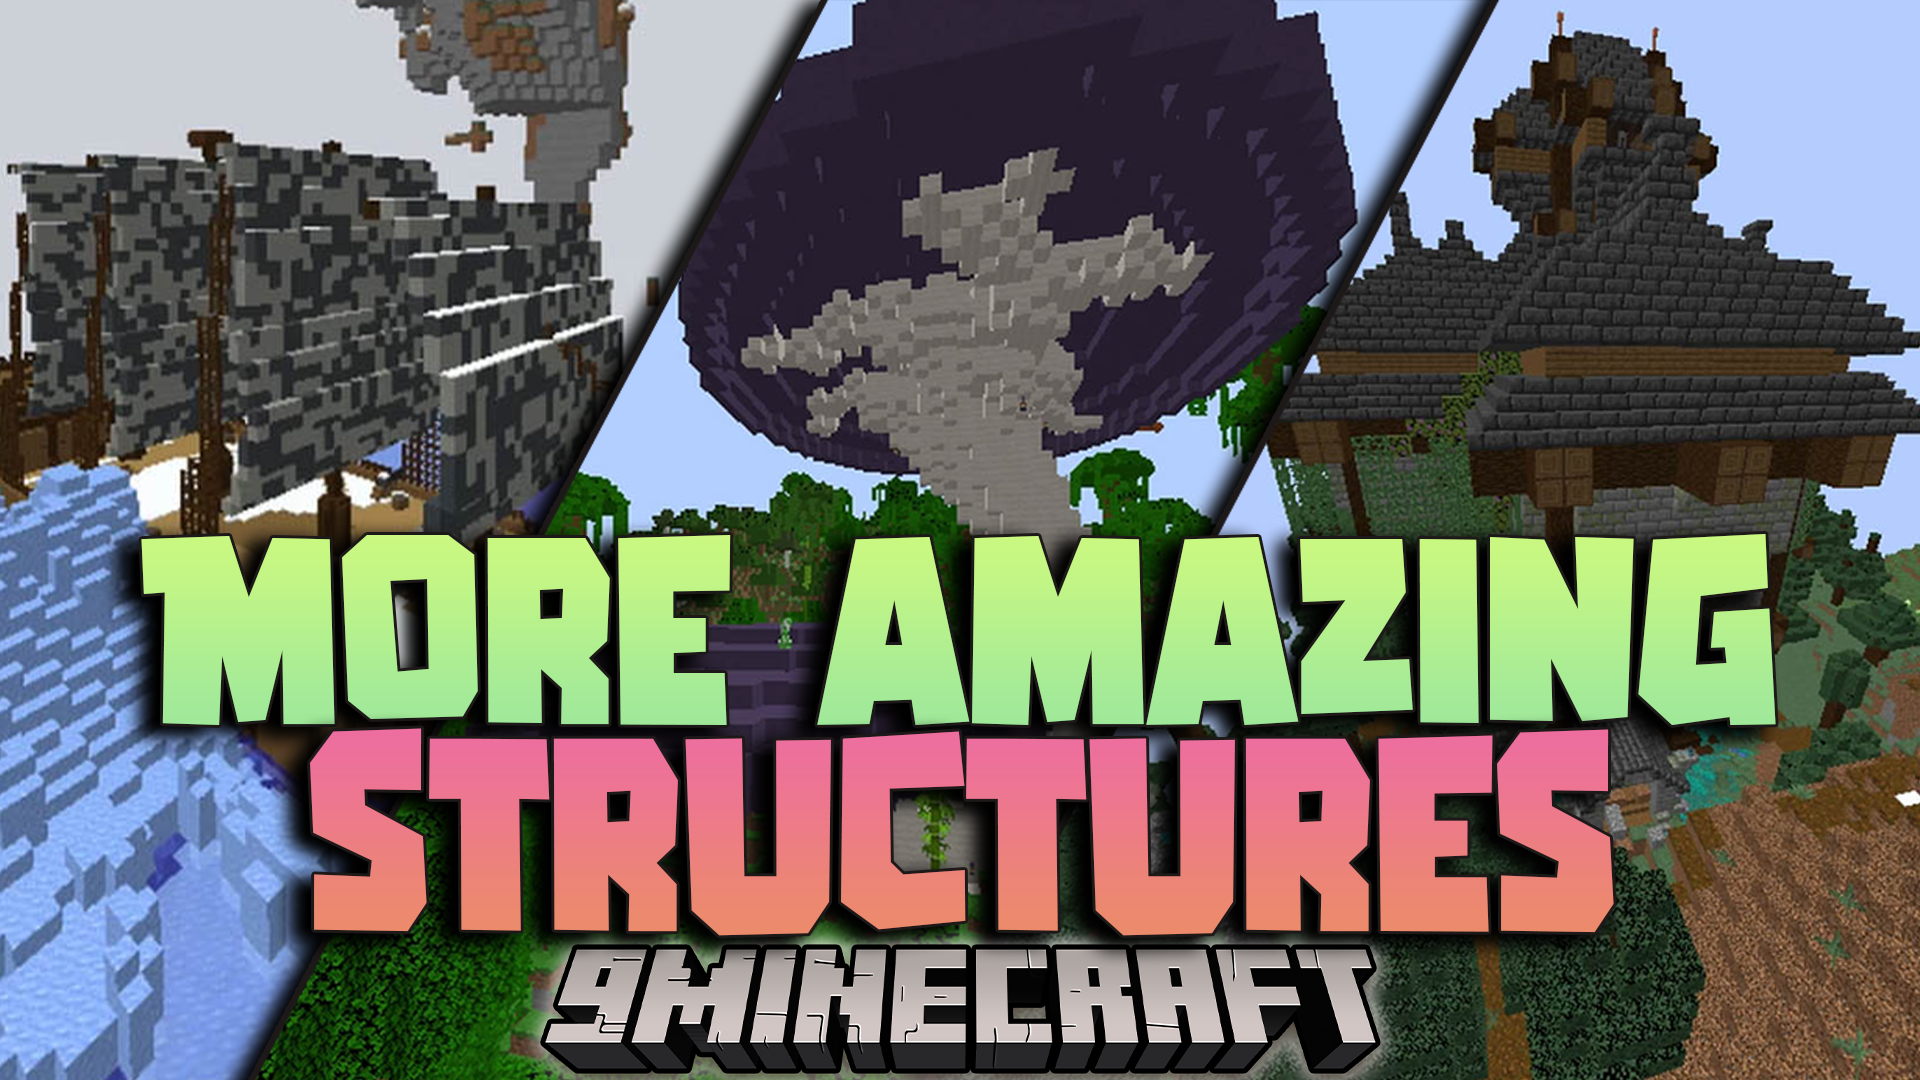 More Amazing Structures Data Pack (1.20.1, 1.20) - A World Overflowing With Wonders 1